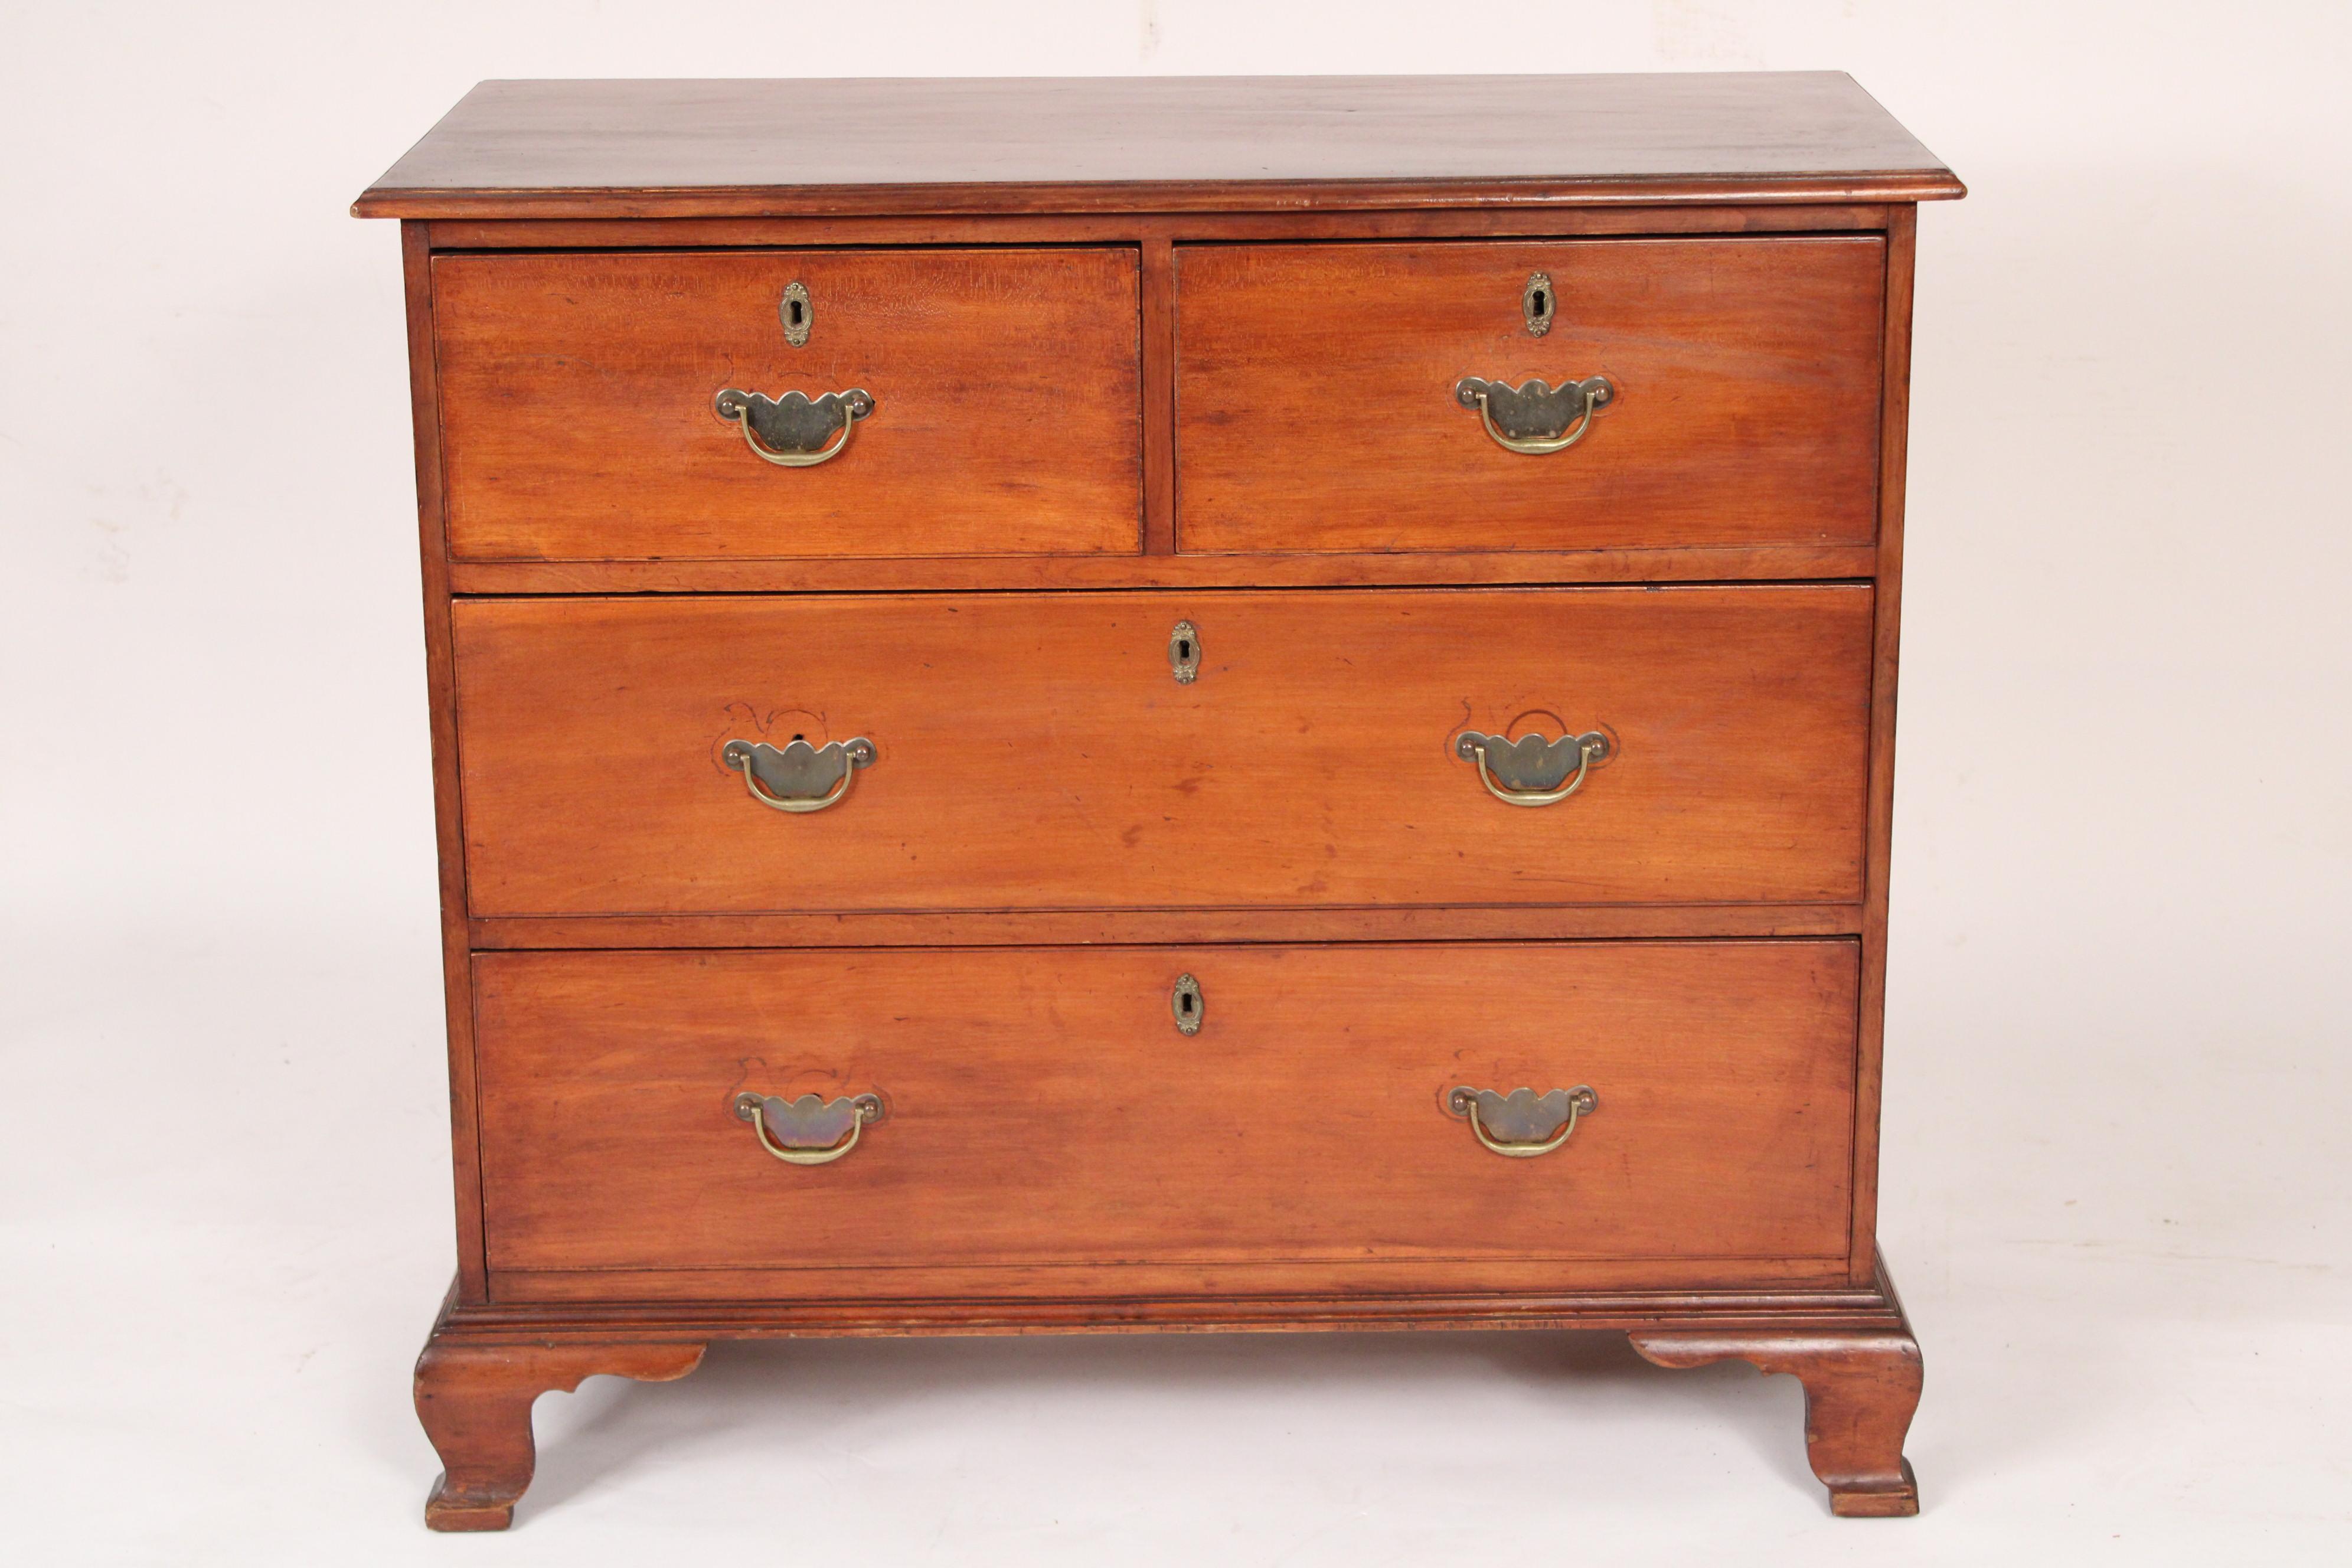 Antique American cherry wood chest of drawers with ogee bracket feet, 19th century.